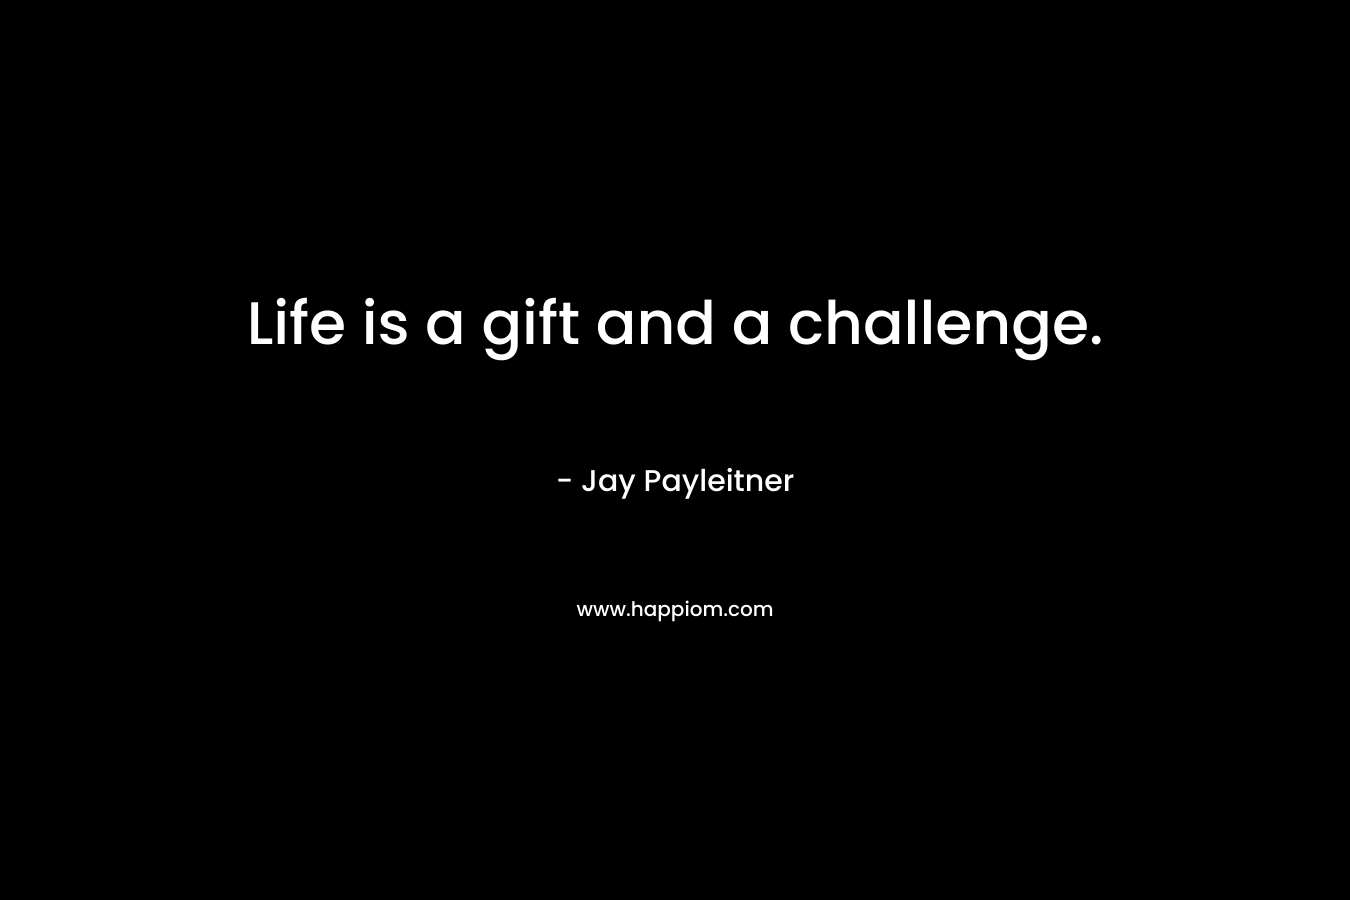 Life is a gift and a challenge.